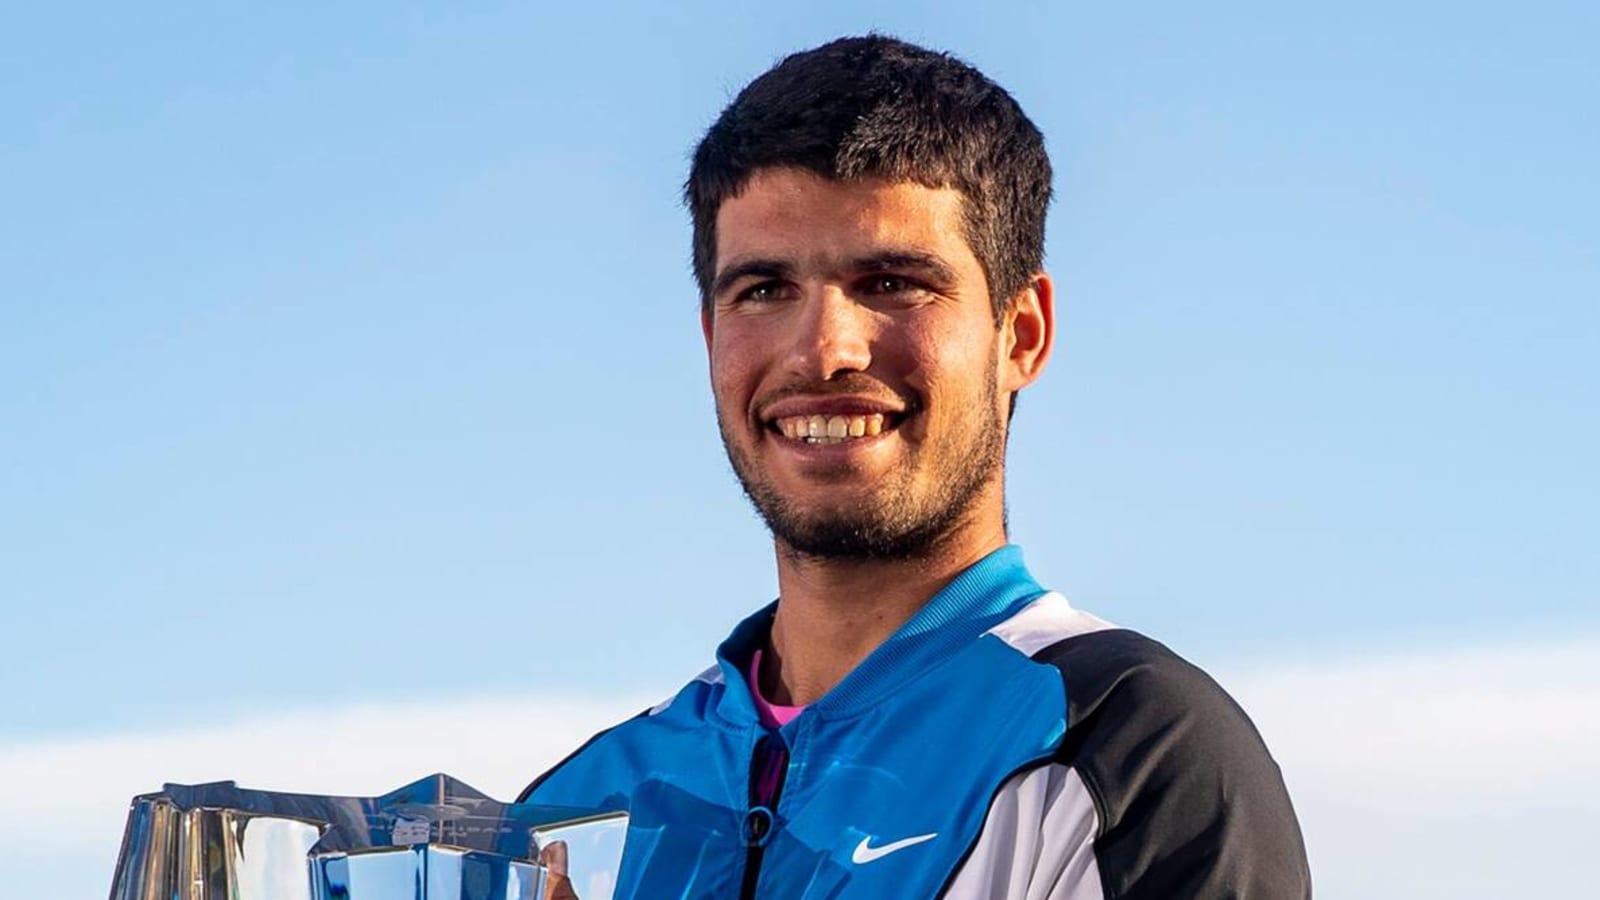 Carlos Alcaraz goes back-to-back at Indian Wells